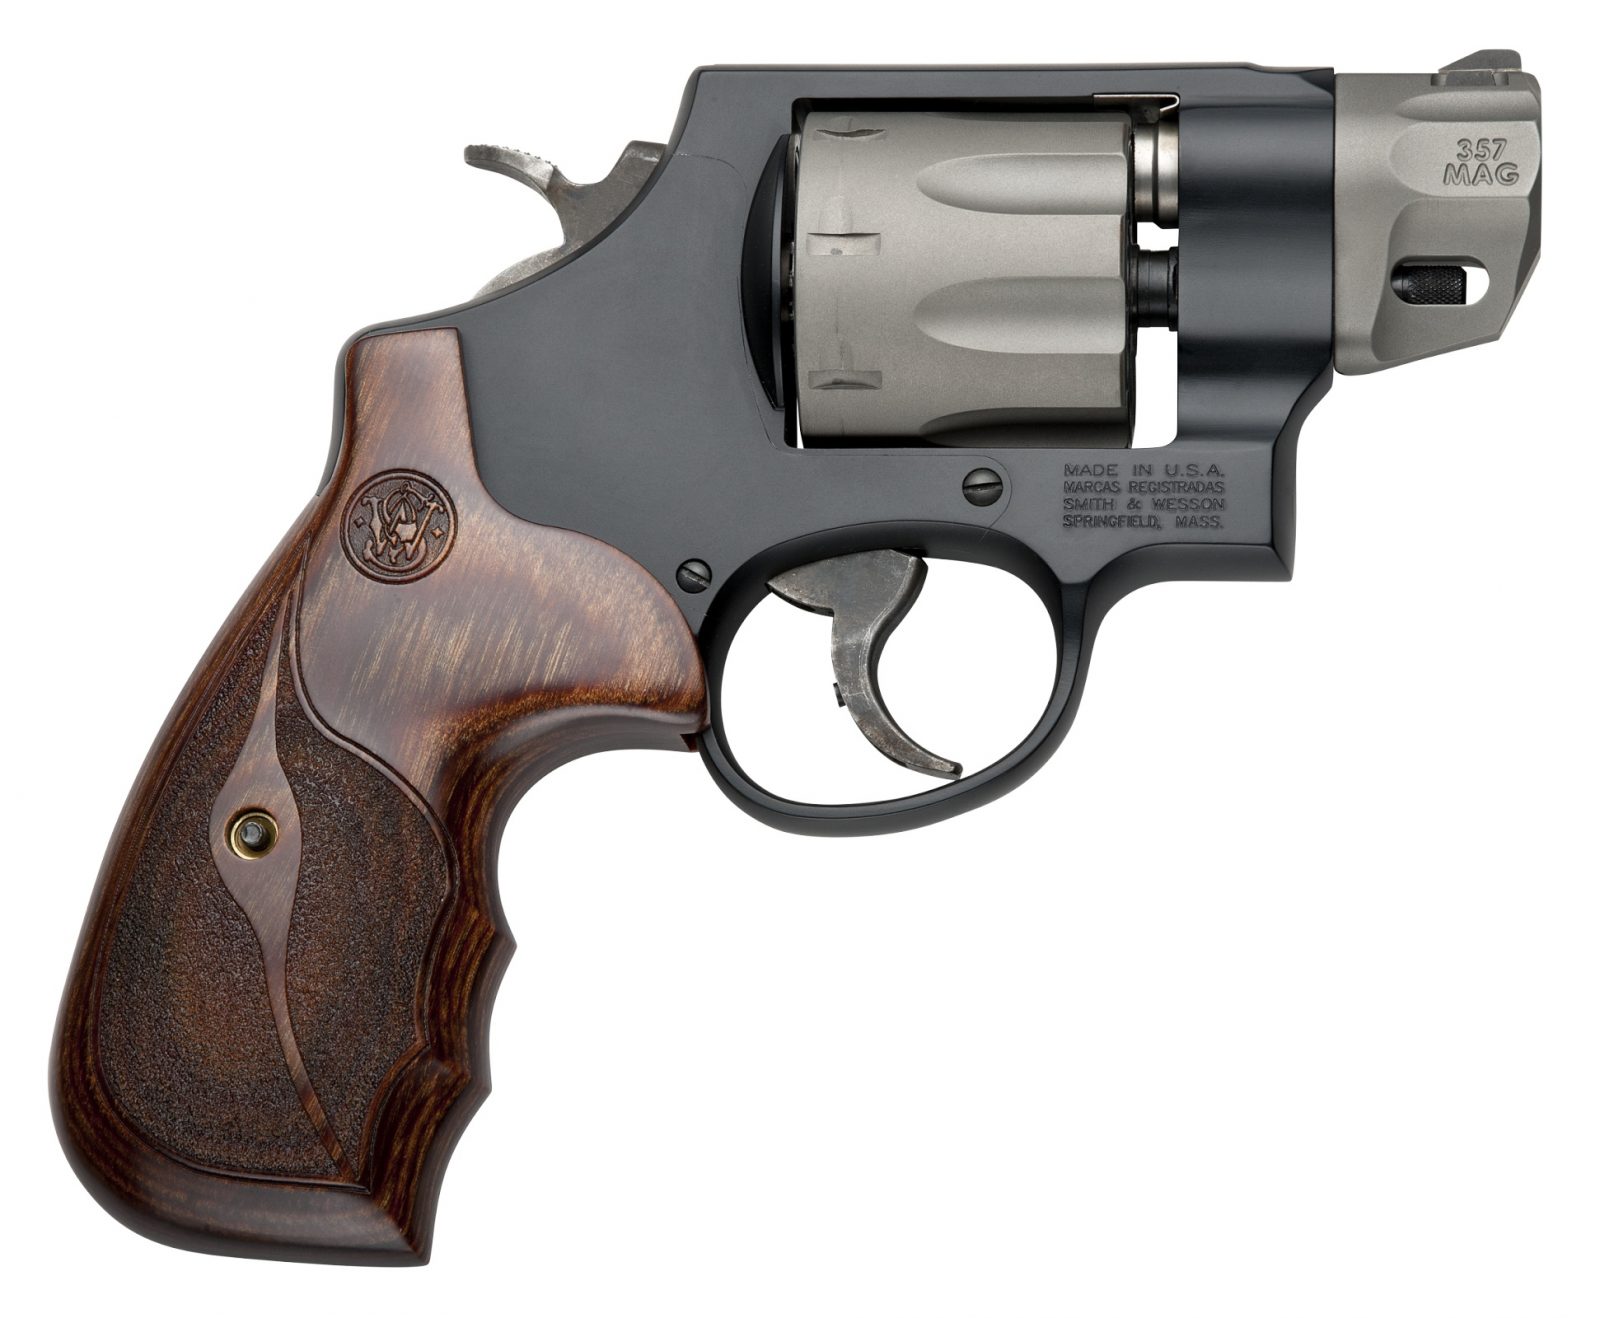 smith-wesson-model-327-performance-center-357-magnum-revolver-8-rd